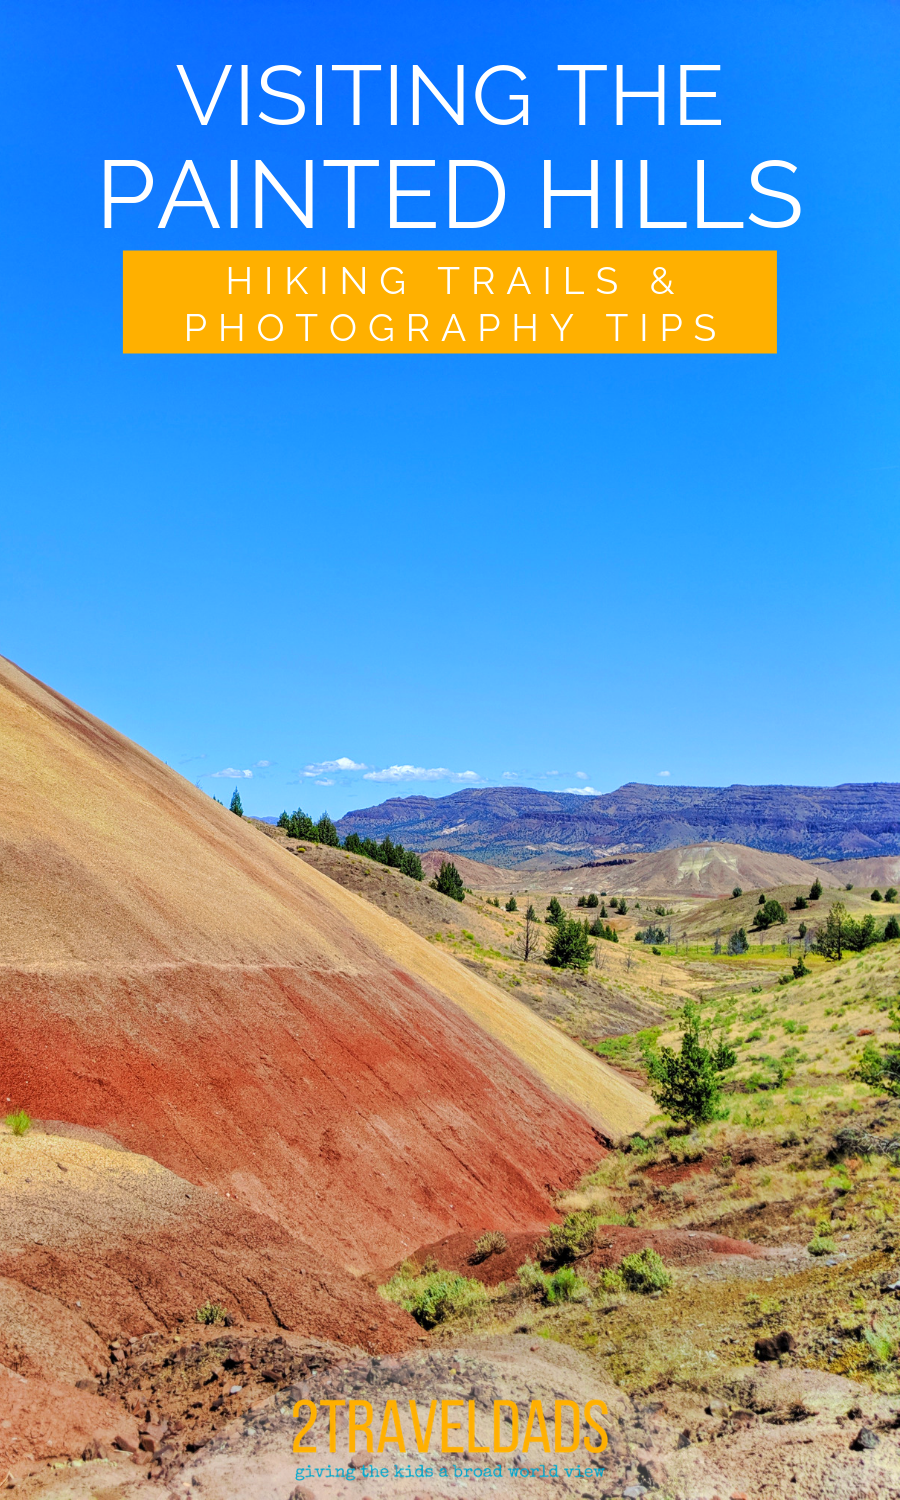 Oregon's Painted Hills: When To Visit, Best Tips You Need To Know